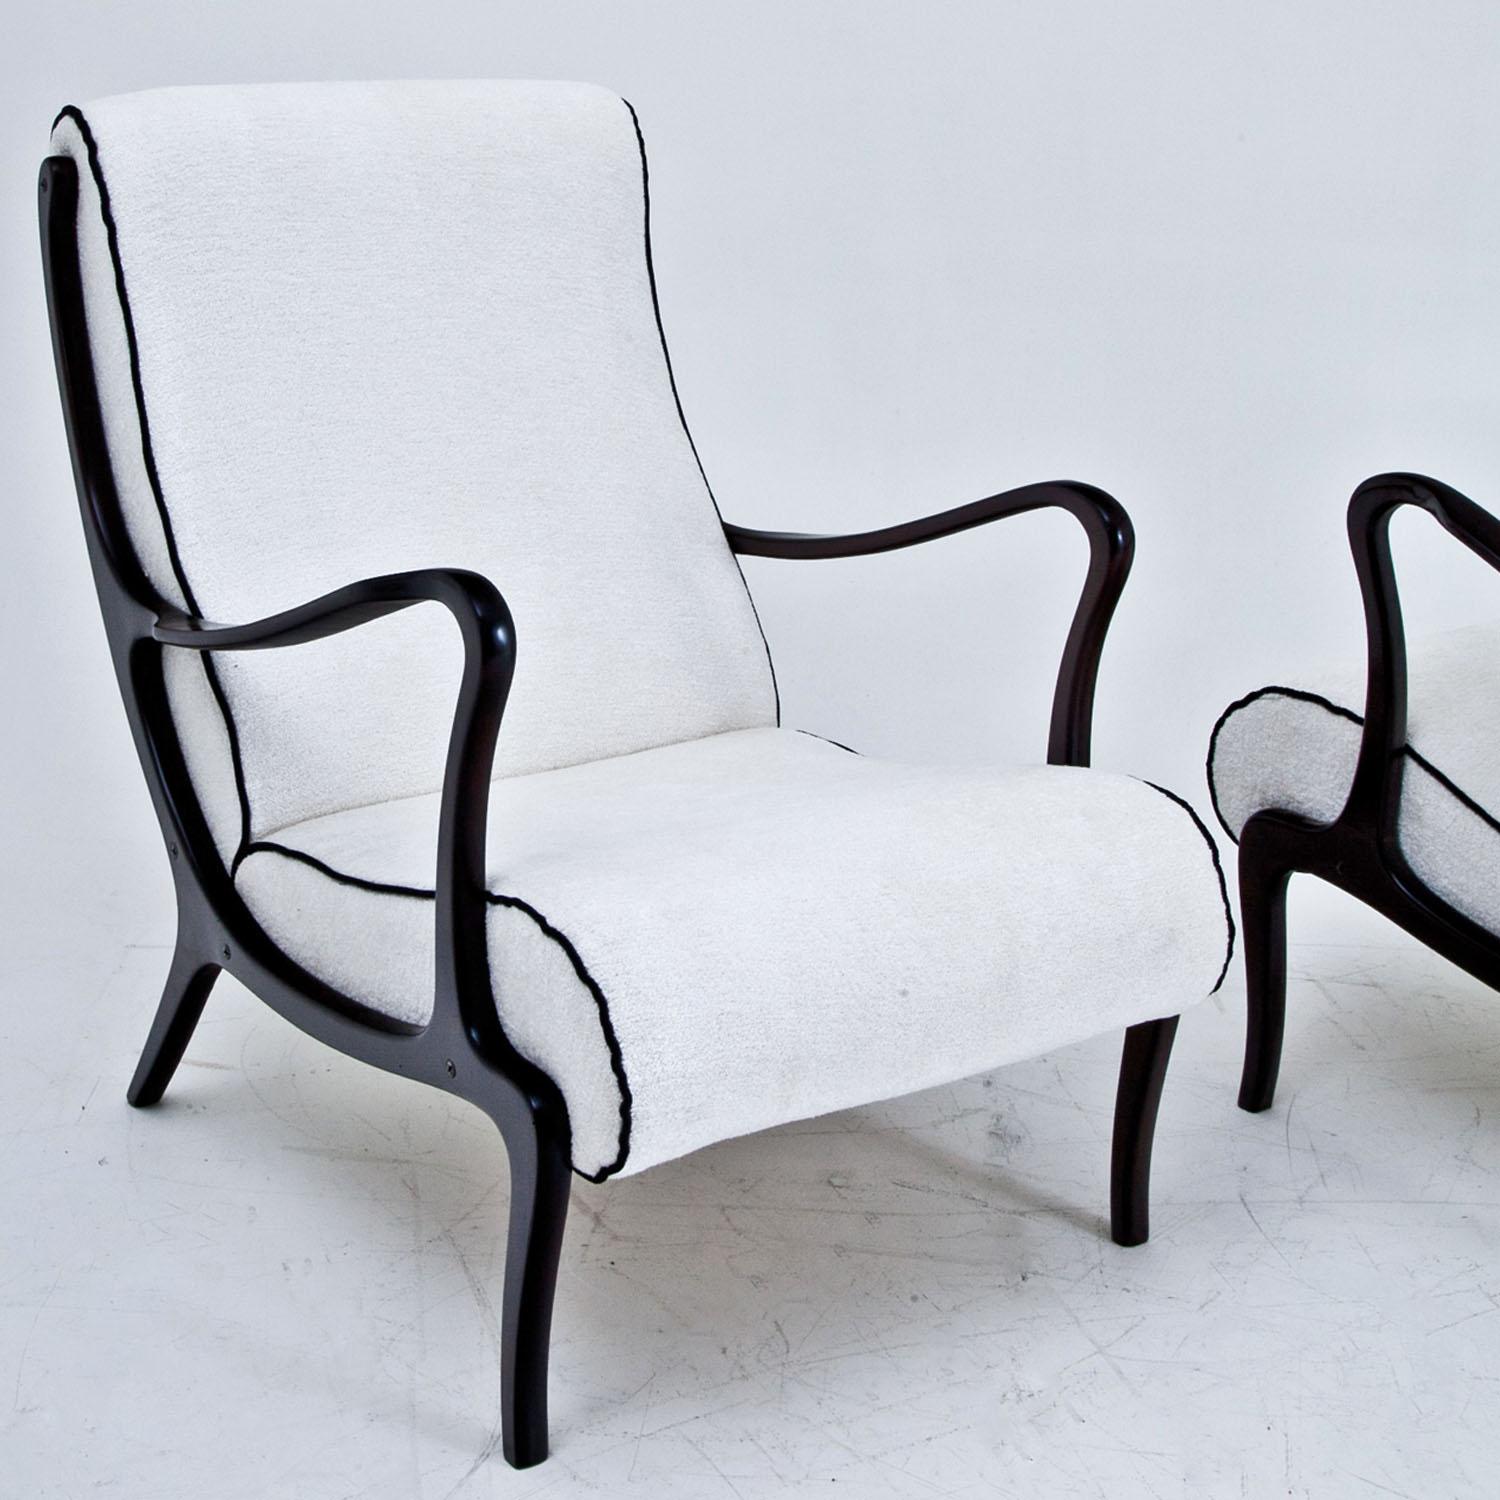 Pair of lounge chairs attributed to Ezio Longhi on slightly bend legs with curved armrests. The seats and backrests were reupholstered with a high quality white fabric with black piping.